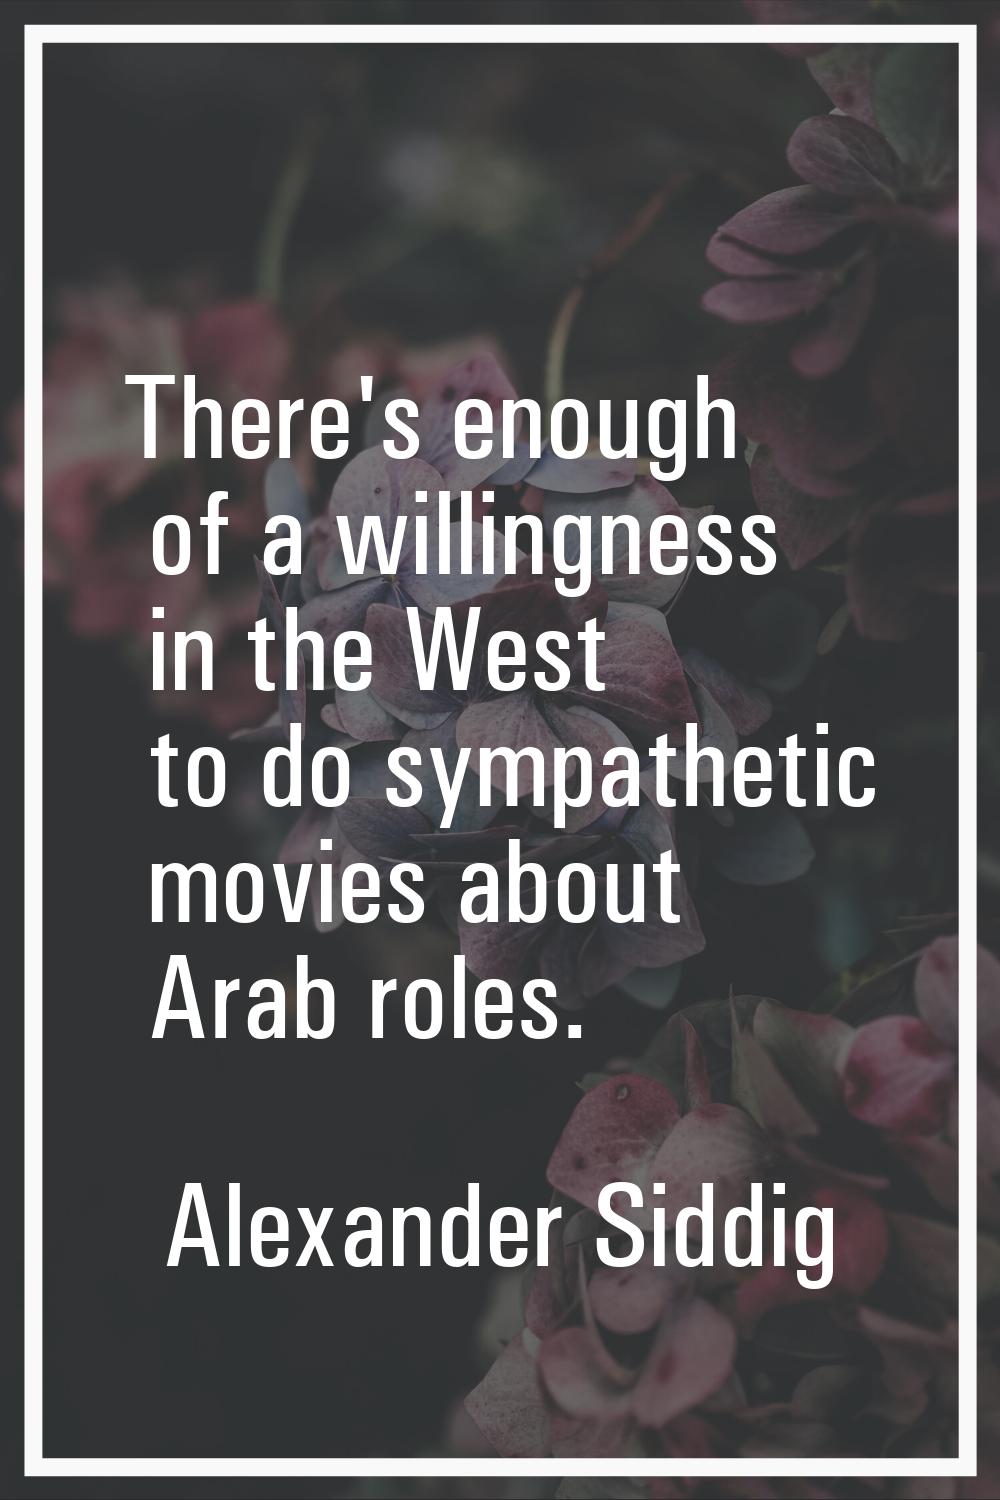 There's enough of a willingness in the West to do sympathetic movies about Arab roles.